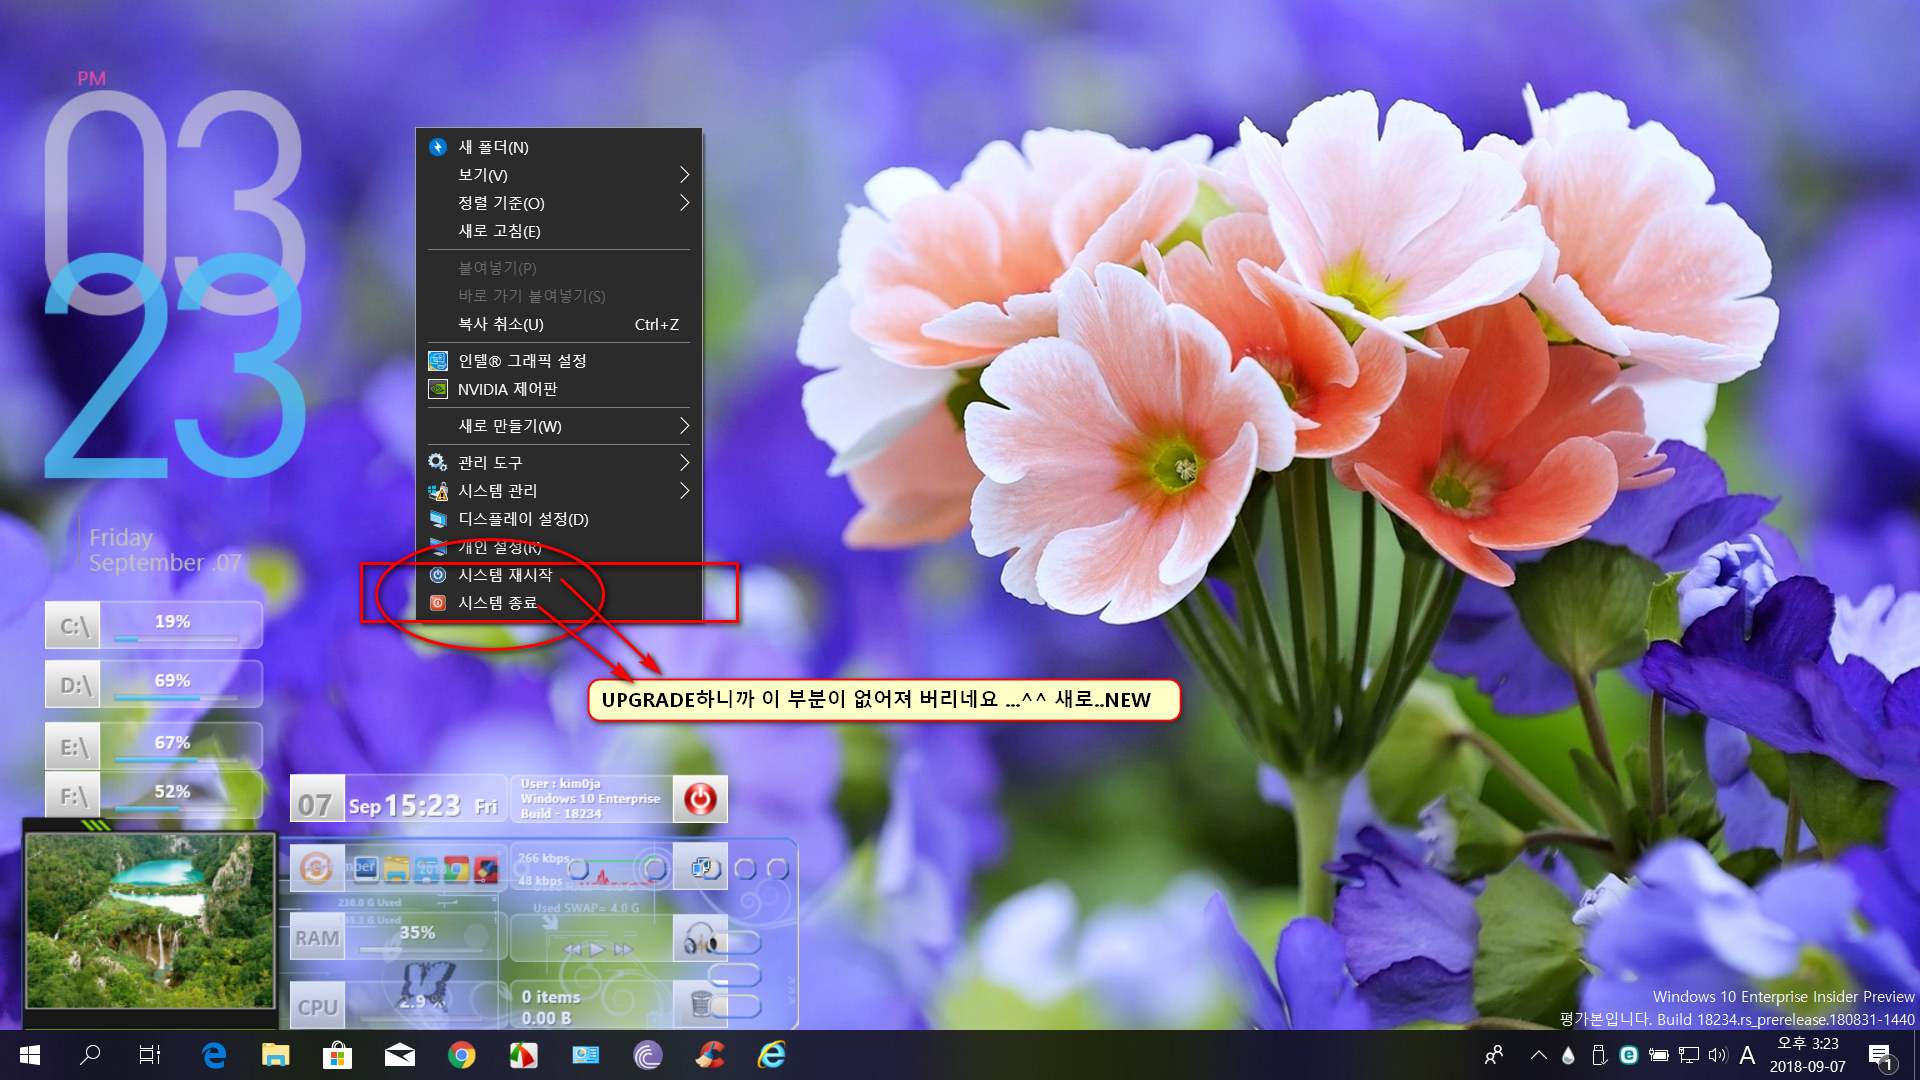 06-19H1.Windows 10 Insider Preview 18234.1000 (rs_prerelease)로 UPGRADE 중임.png